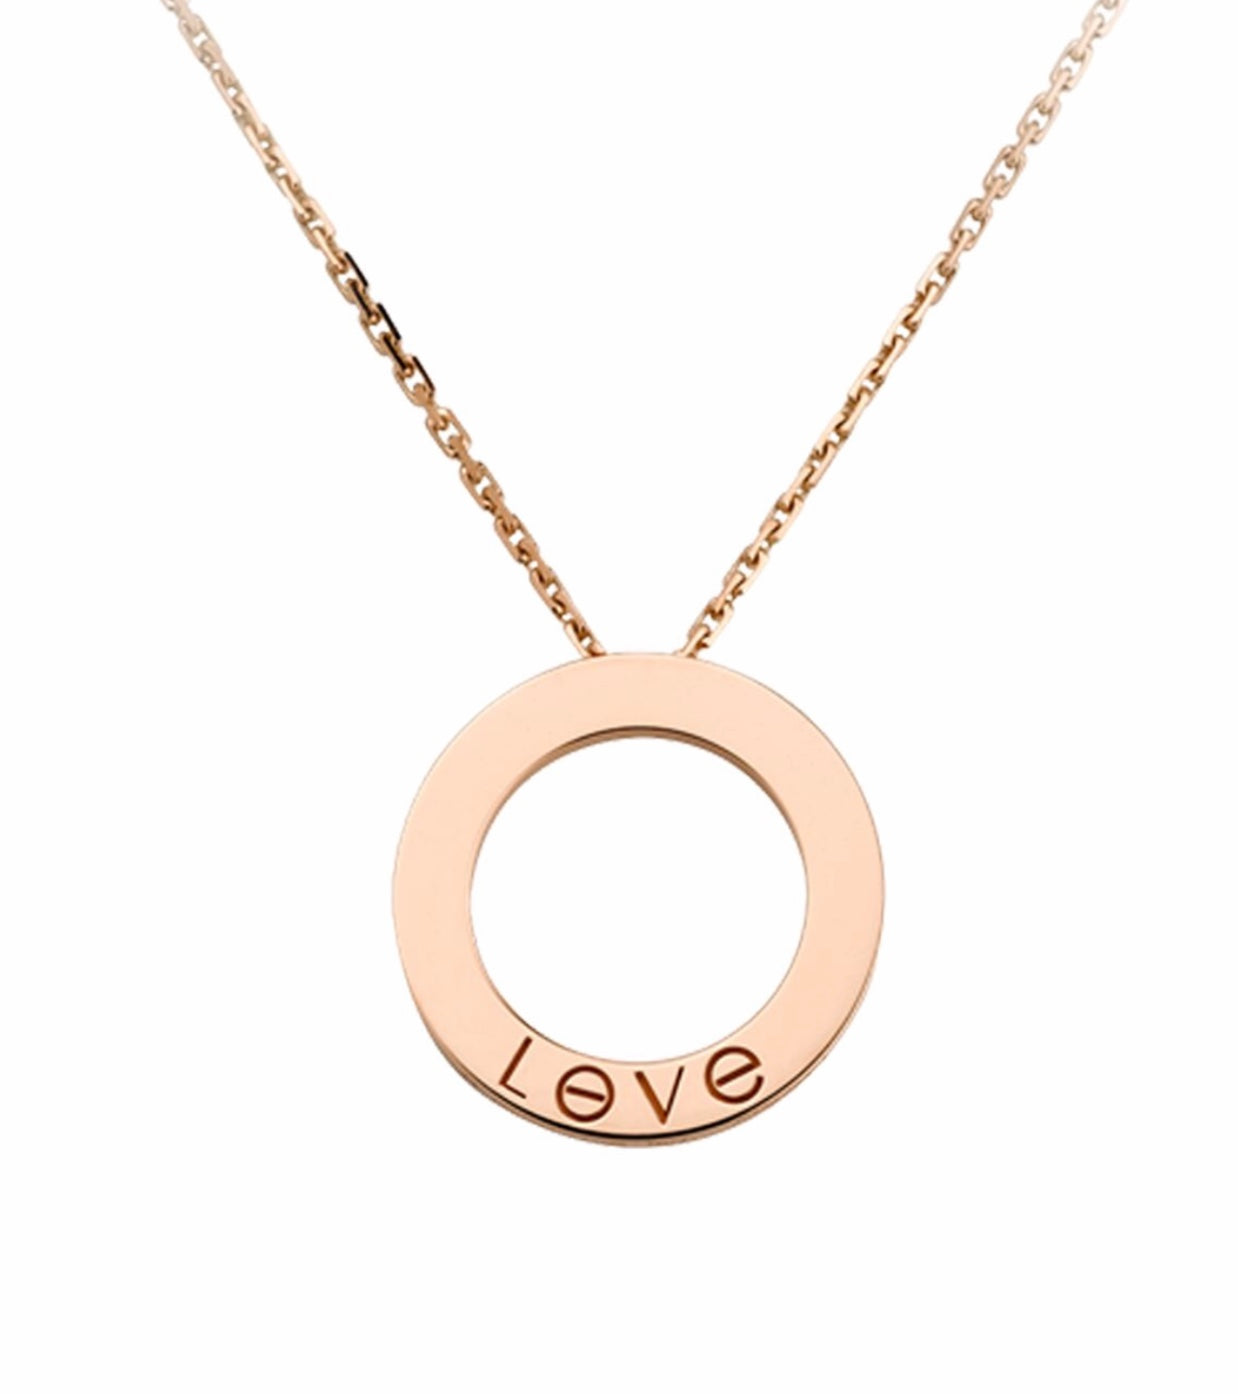 Cartier Love Necklace in Rose Gold 